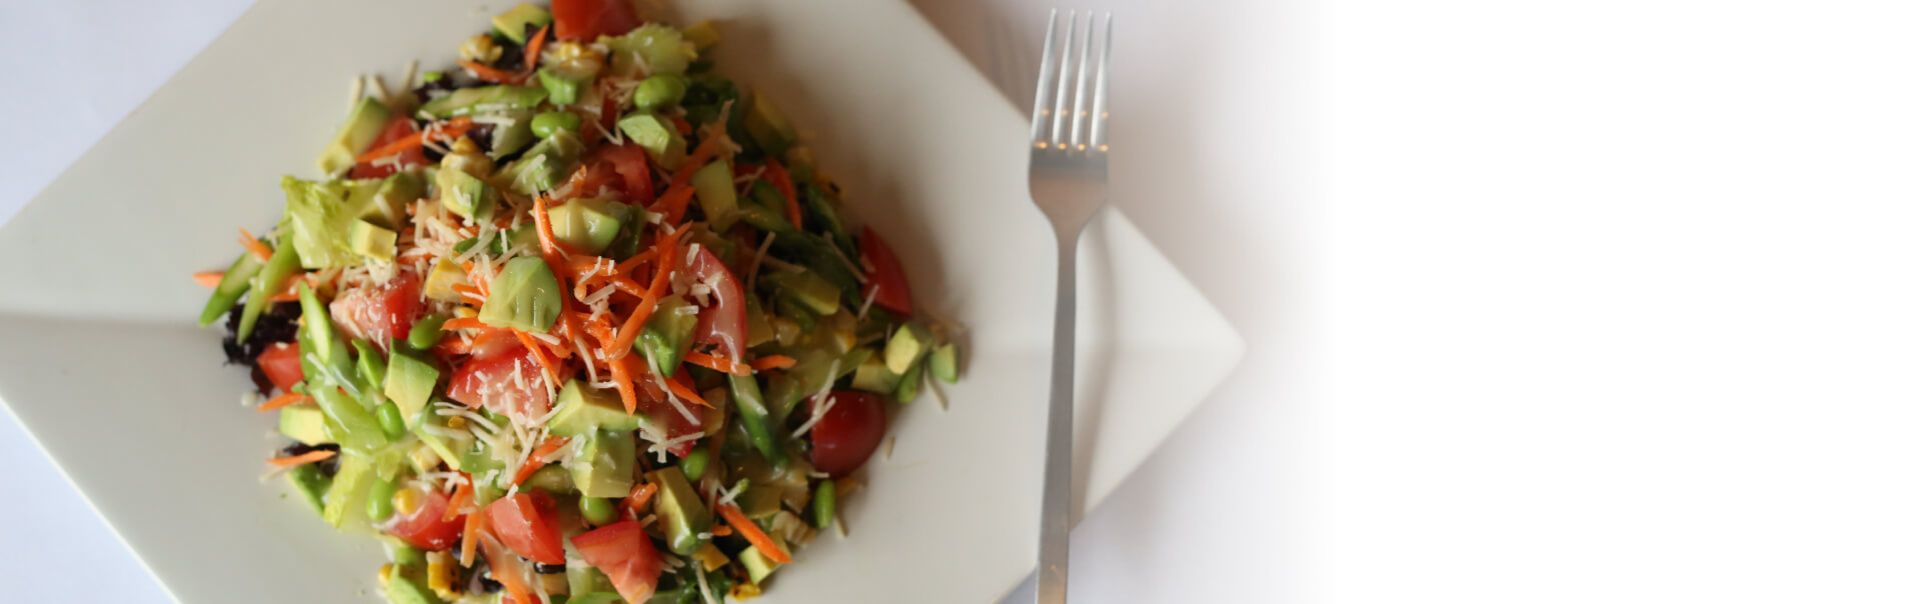 vegetable salad with avocado, tomatos, carrots and green peas